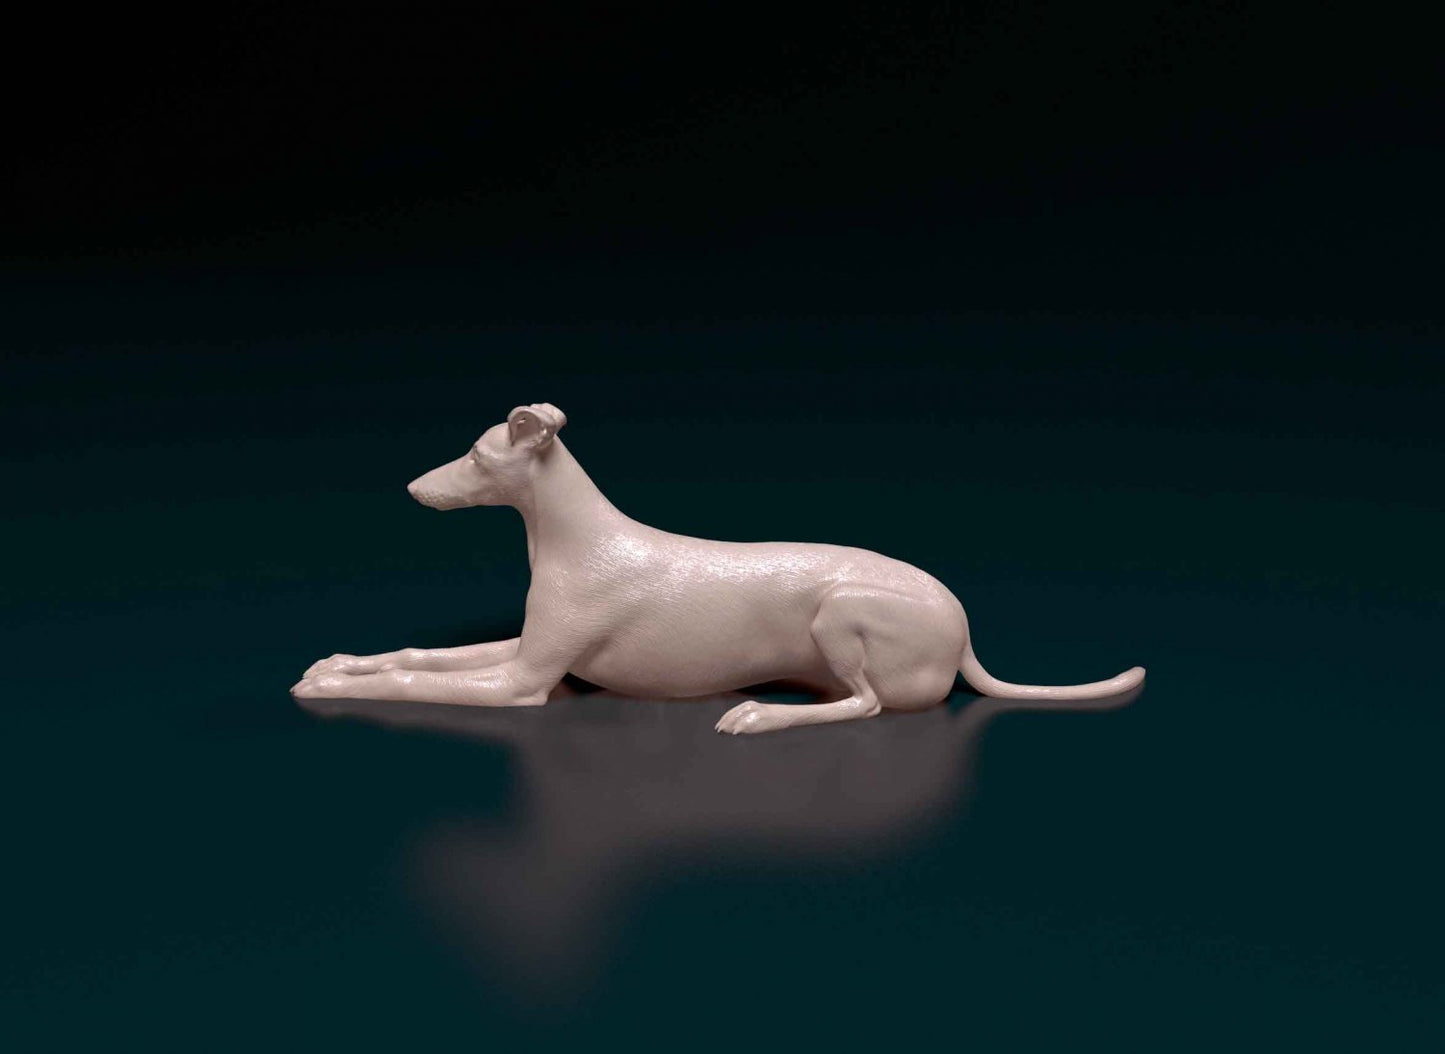 saluki x greyhound cross dog artist resin - white resin ready to prep / paint ALL SCALES